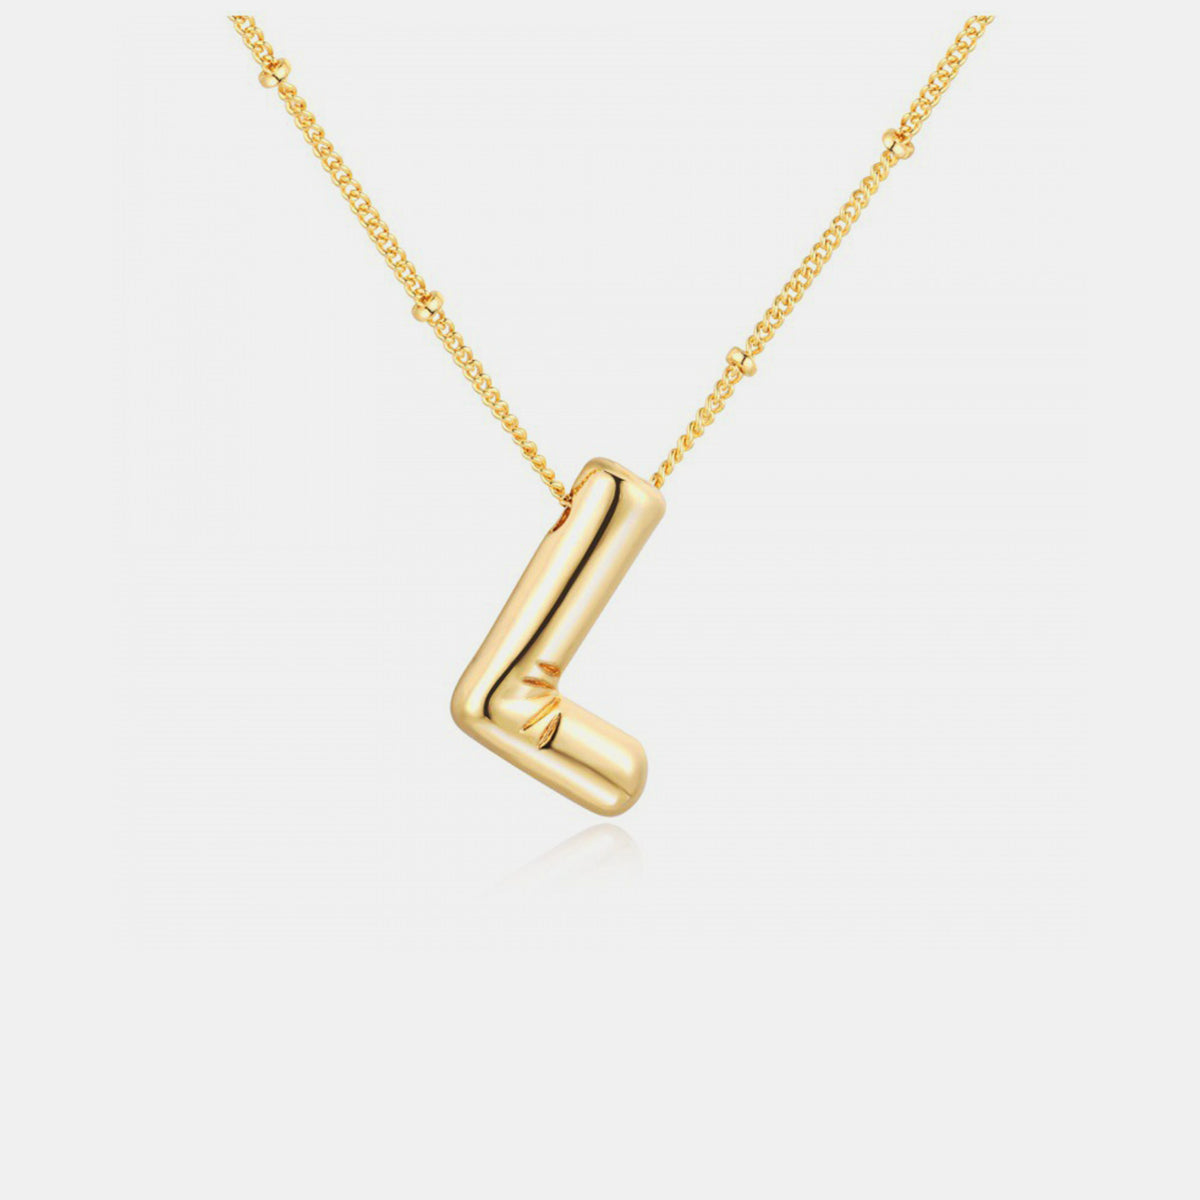 TEEK - K-S Gold-Plated Letter Pendant Necklace JEWELRY TEEK Trend Style L  